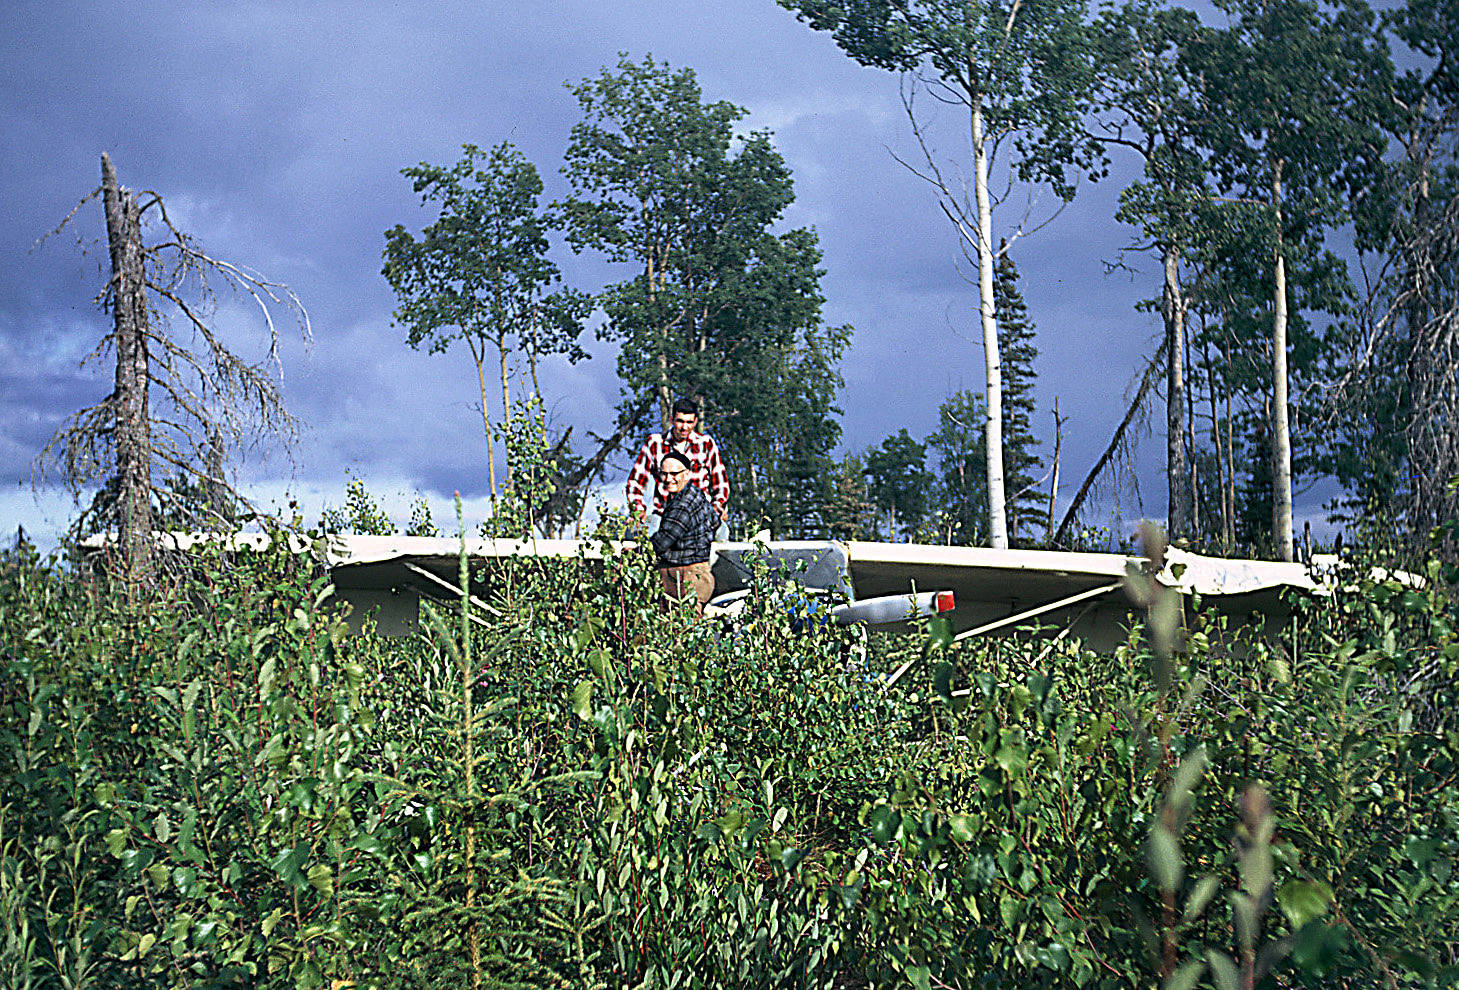 Friends of Elmer Gaede effect repairs to the doctor’s Maule Rocket airplane, which crashed a short distance from Forest Lane between Soldotna and Sterling on Aug. 2, 1967. The airplane was eventually made “fly-able” again and was sold in the early 1970s. (Photo courtesy of the Gaede Collection)